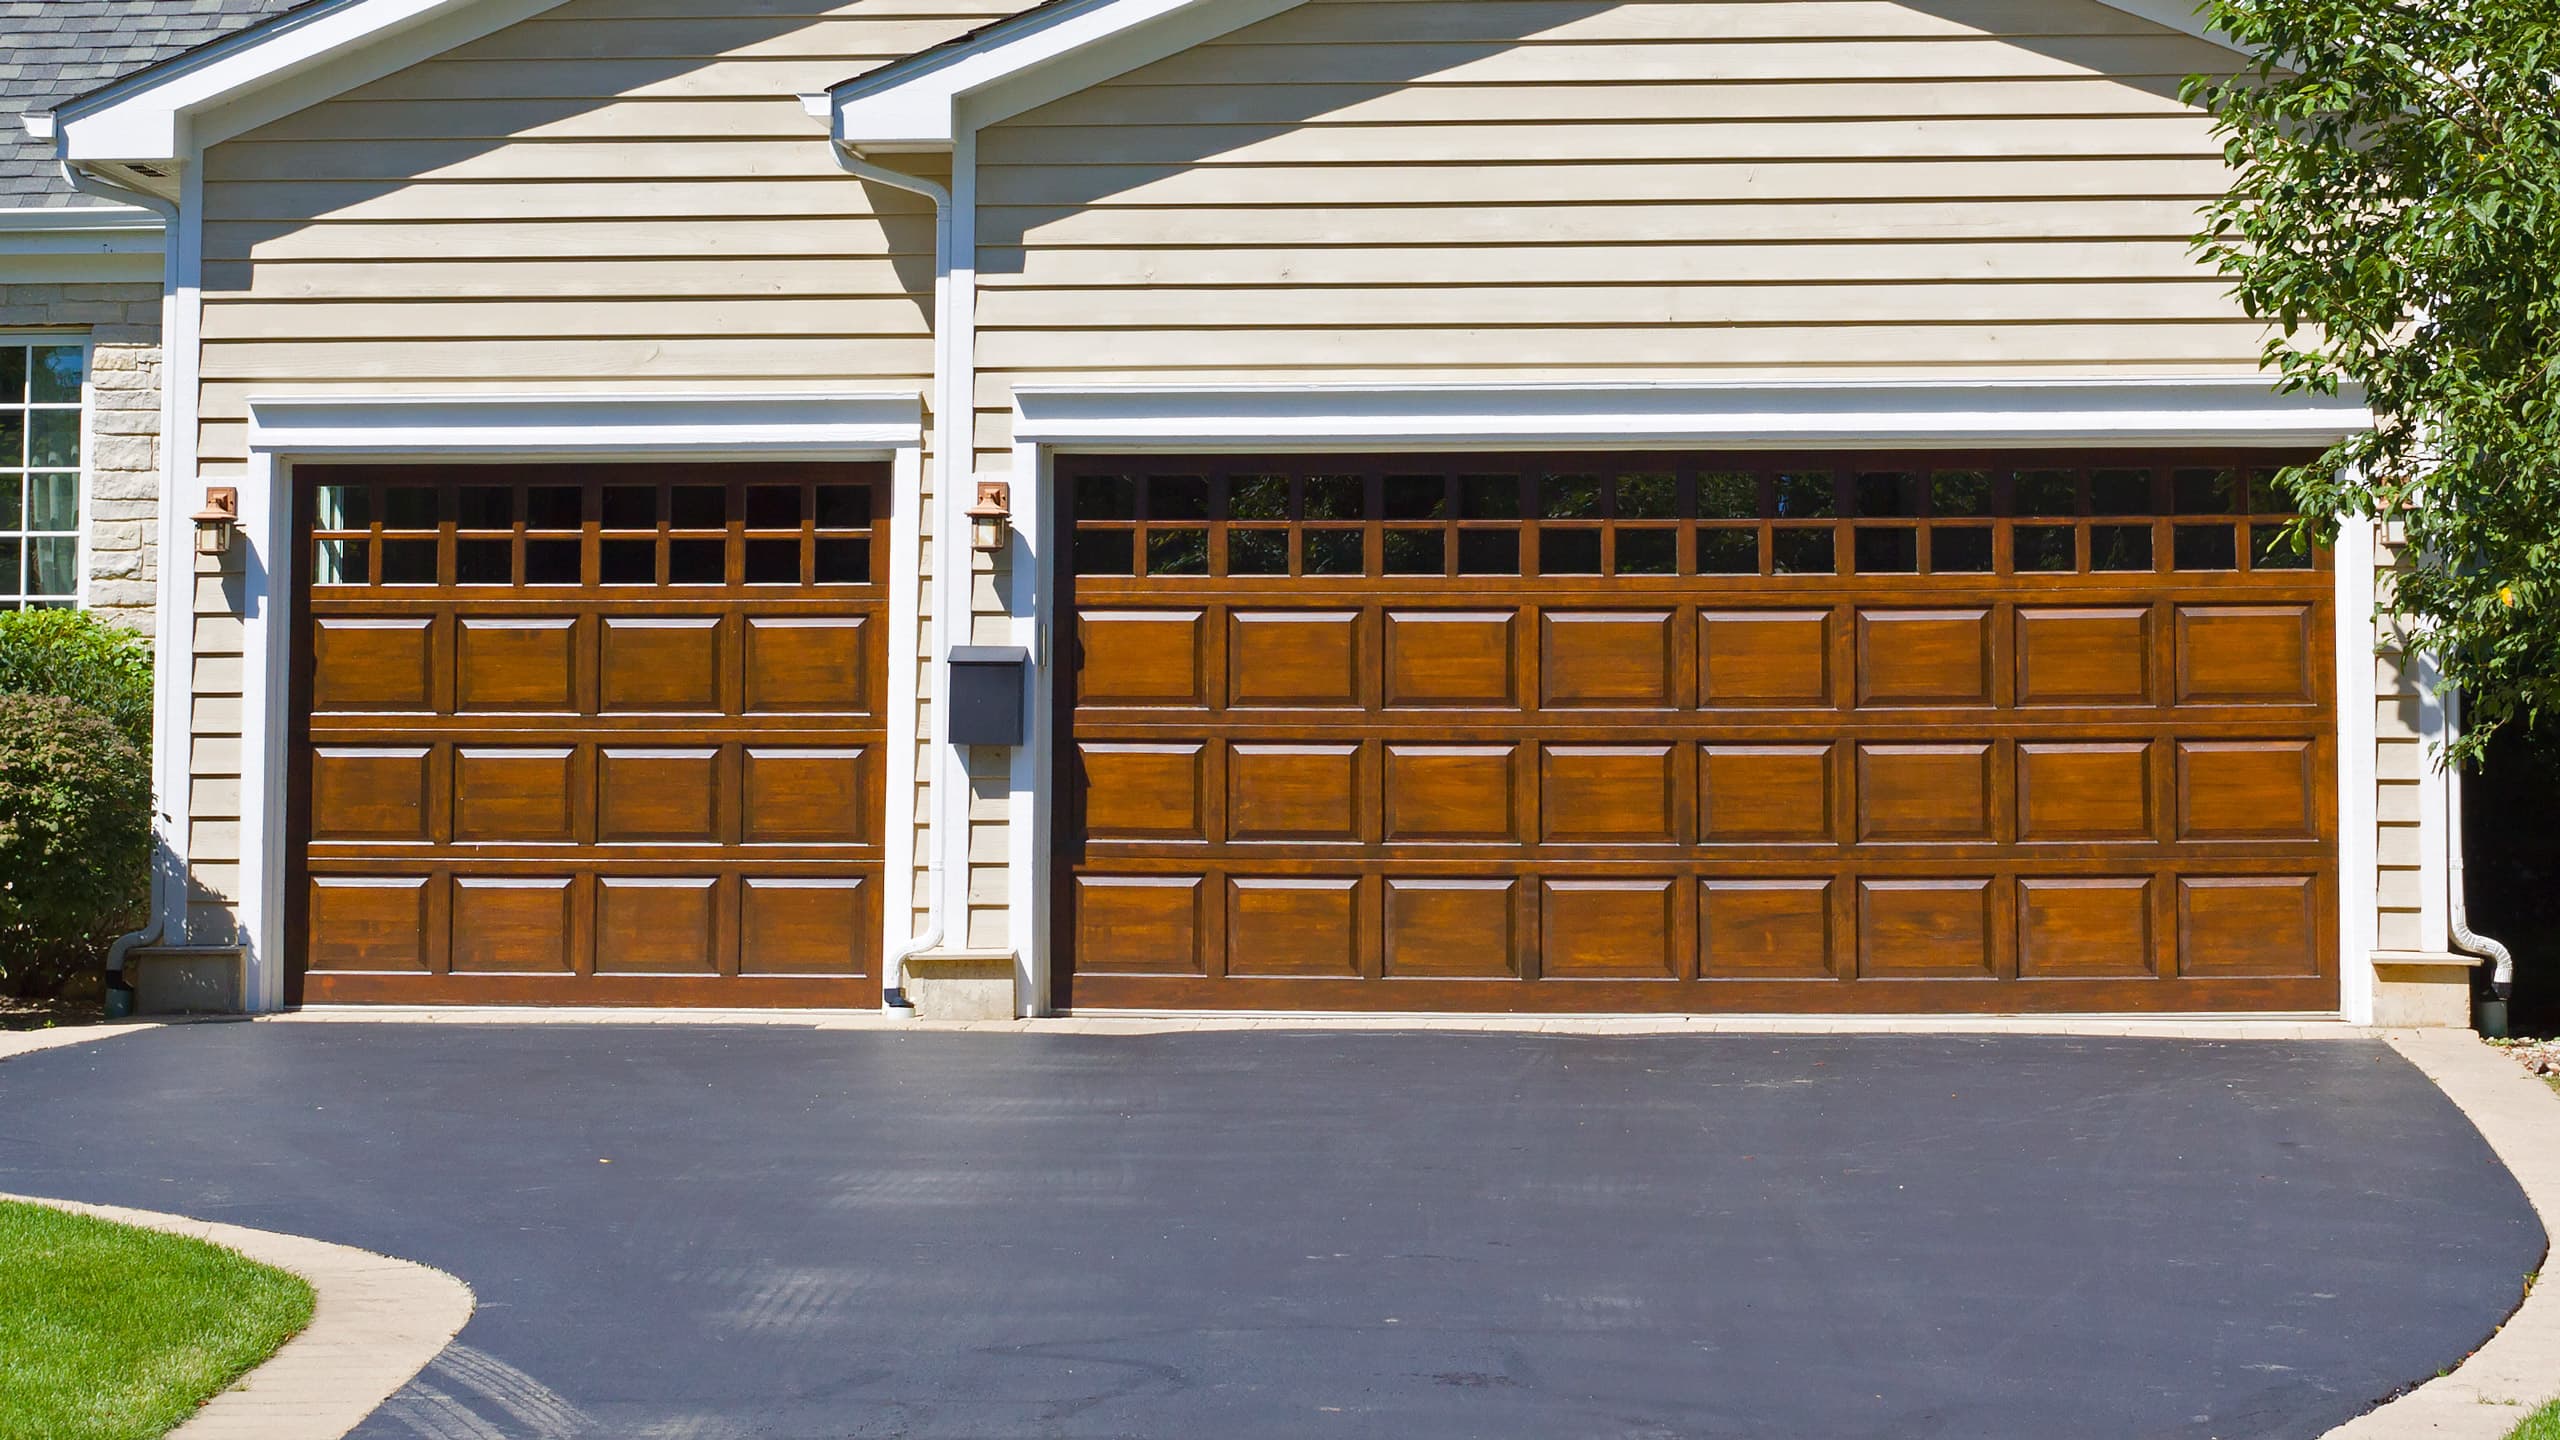 A suburban home with a wooden, traditional style garage door and blacktop driveway on a sunny day